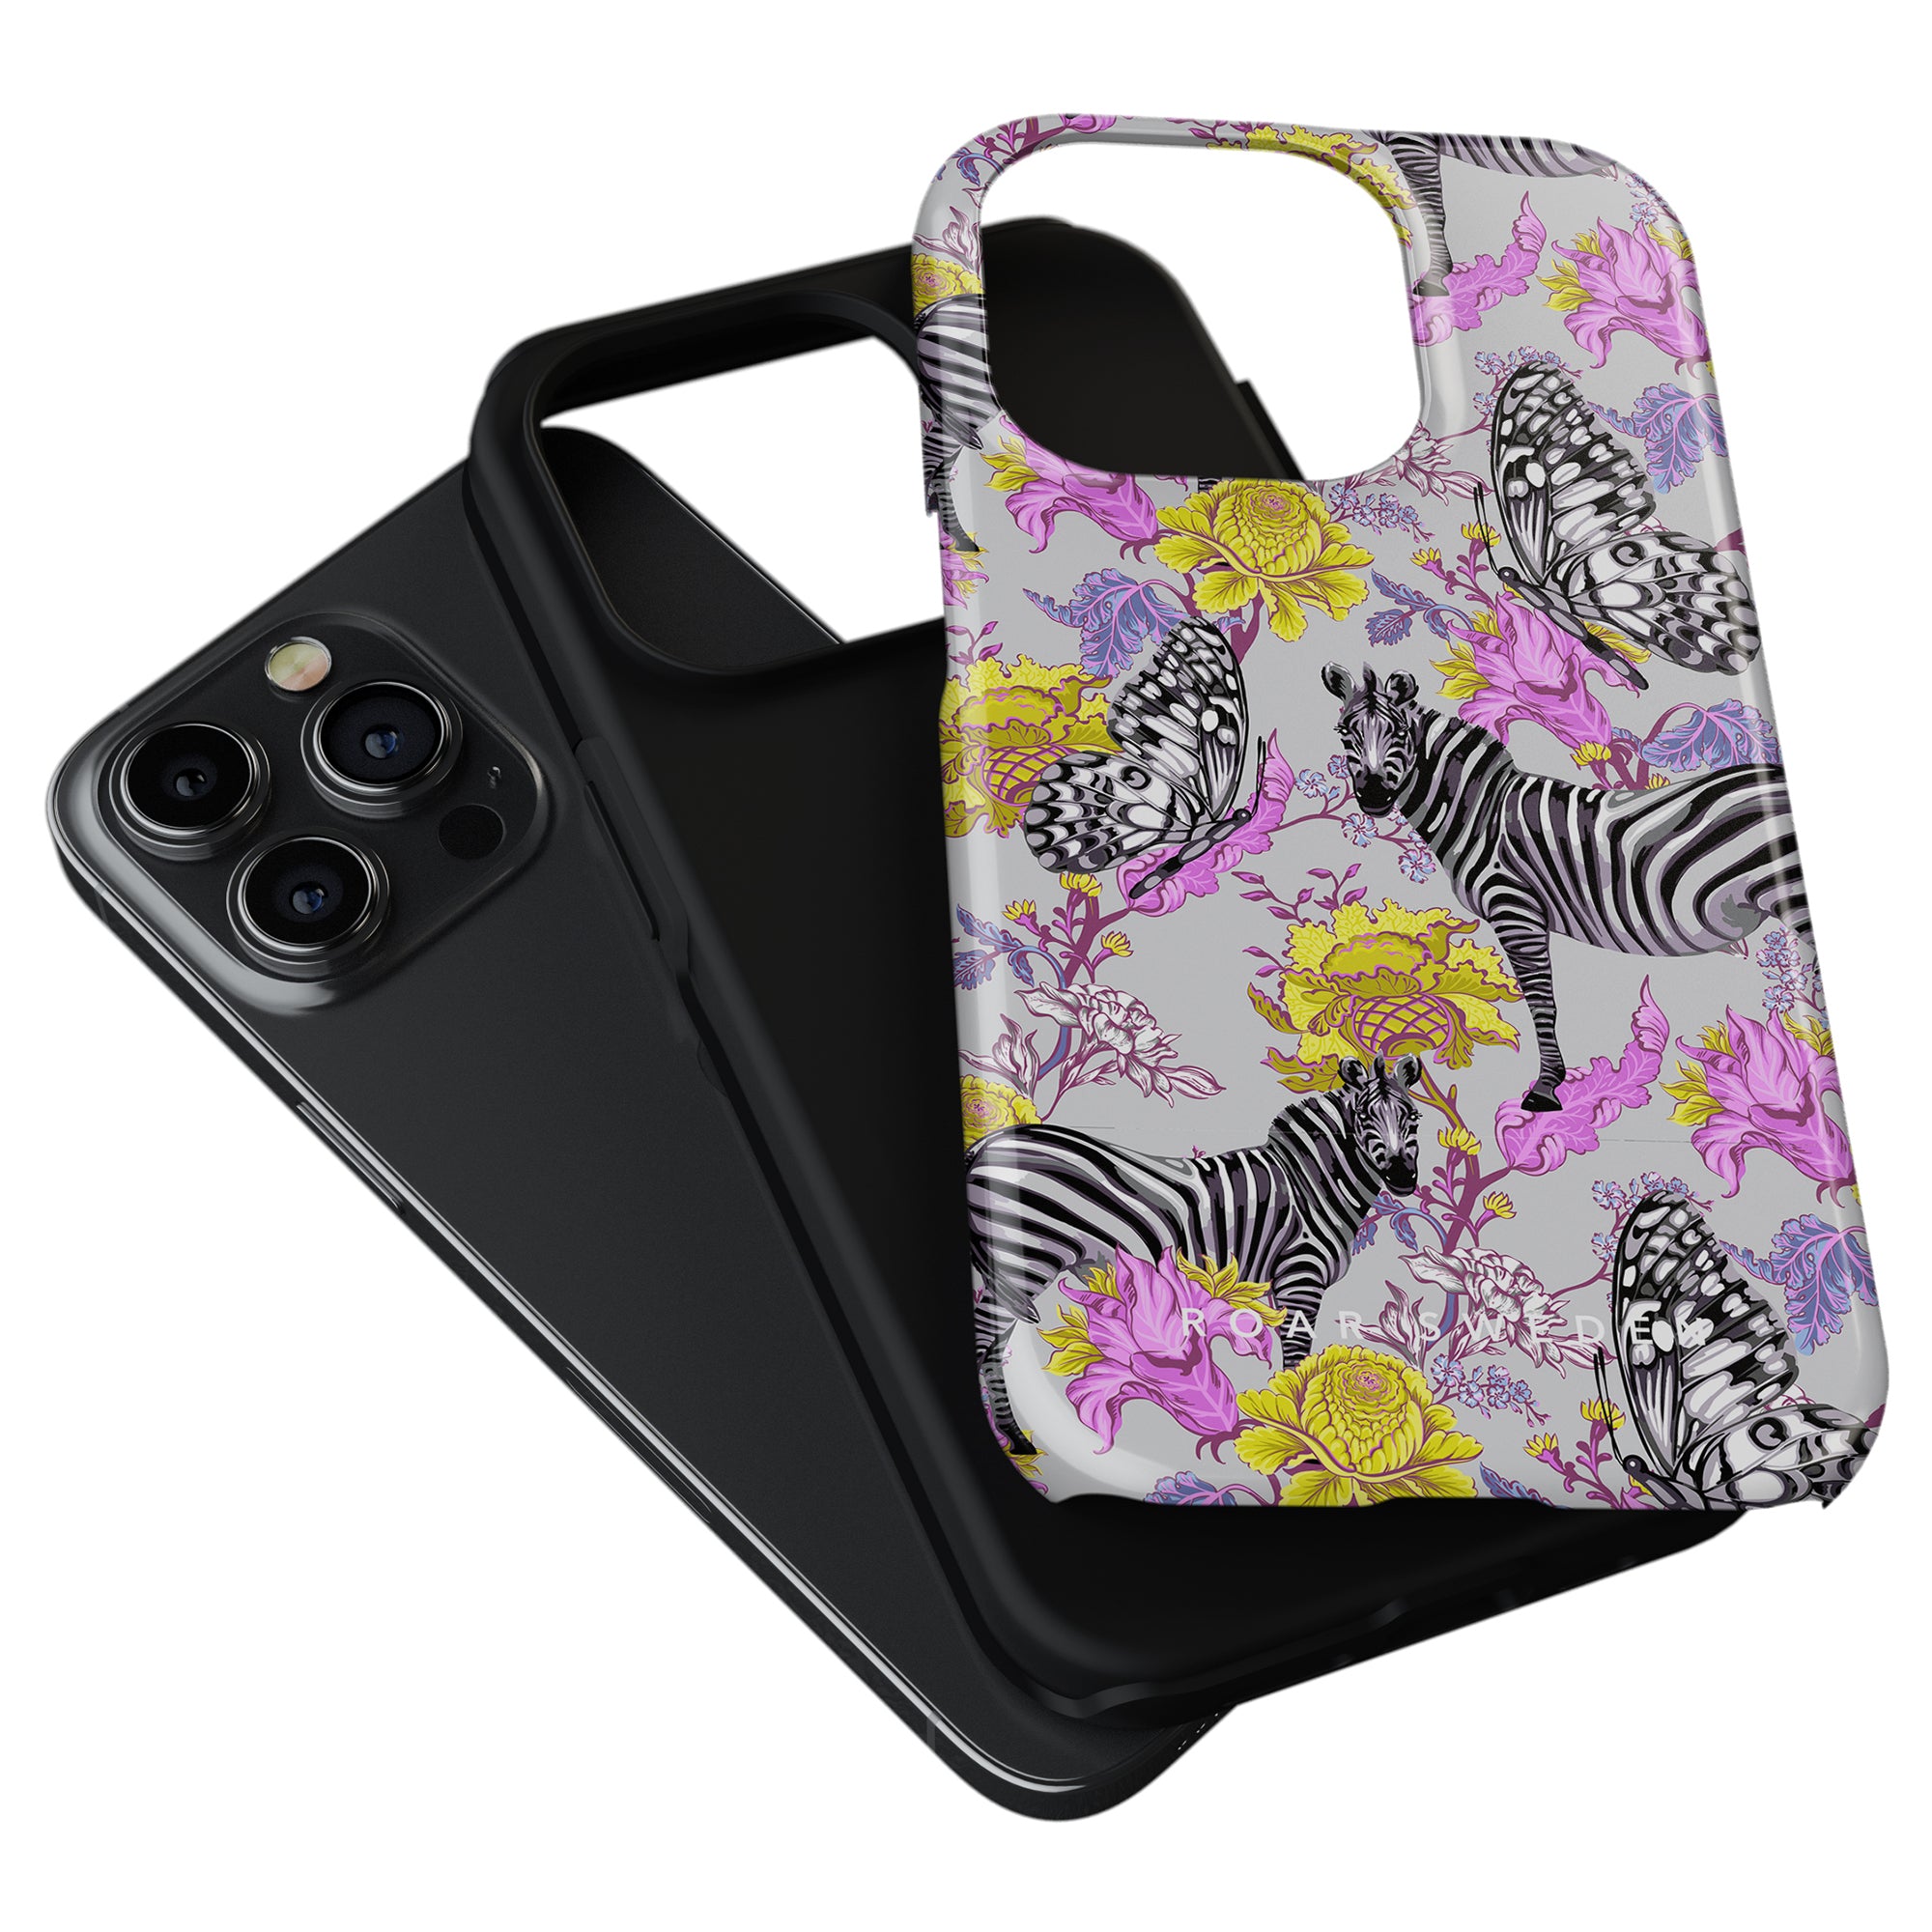 A black smartphone with a triple-camera system next to an Exotic Zebra - Tough Case featuring an Exotic Zebra and floral print design.